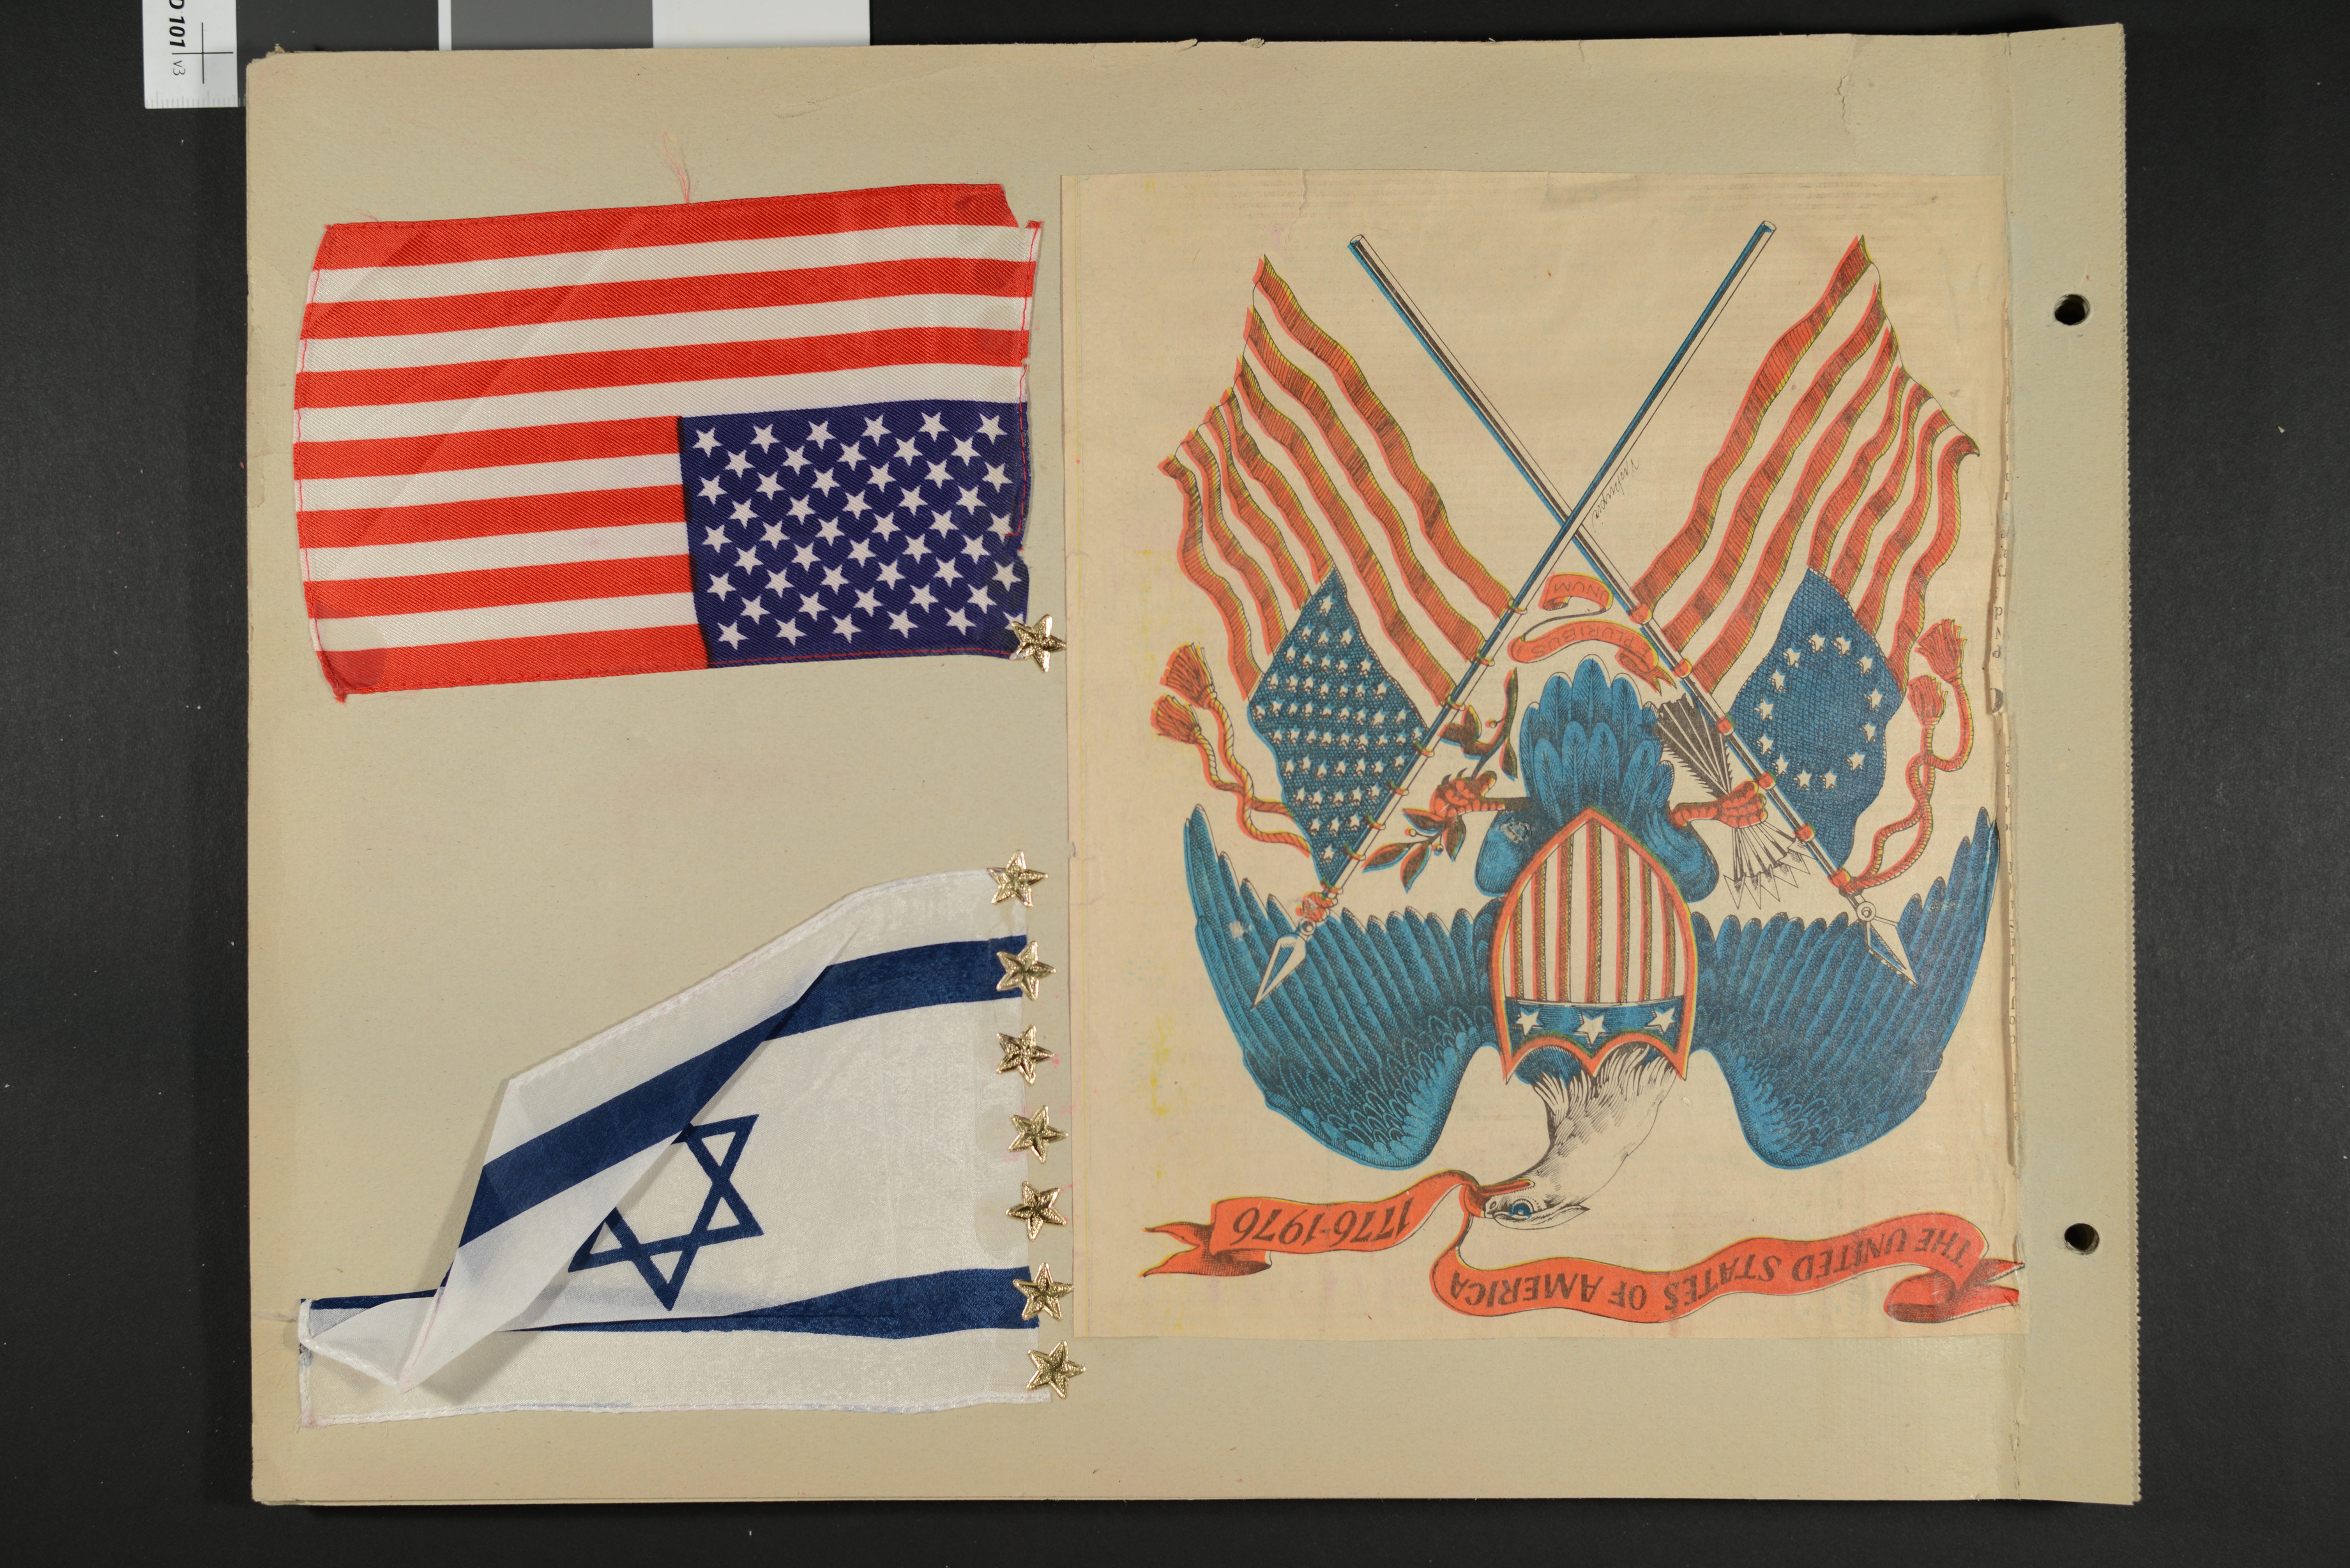 Clipping of bald eagle, Israeli flag and American flag